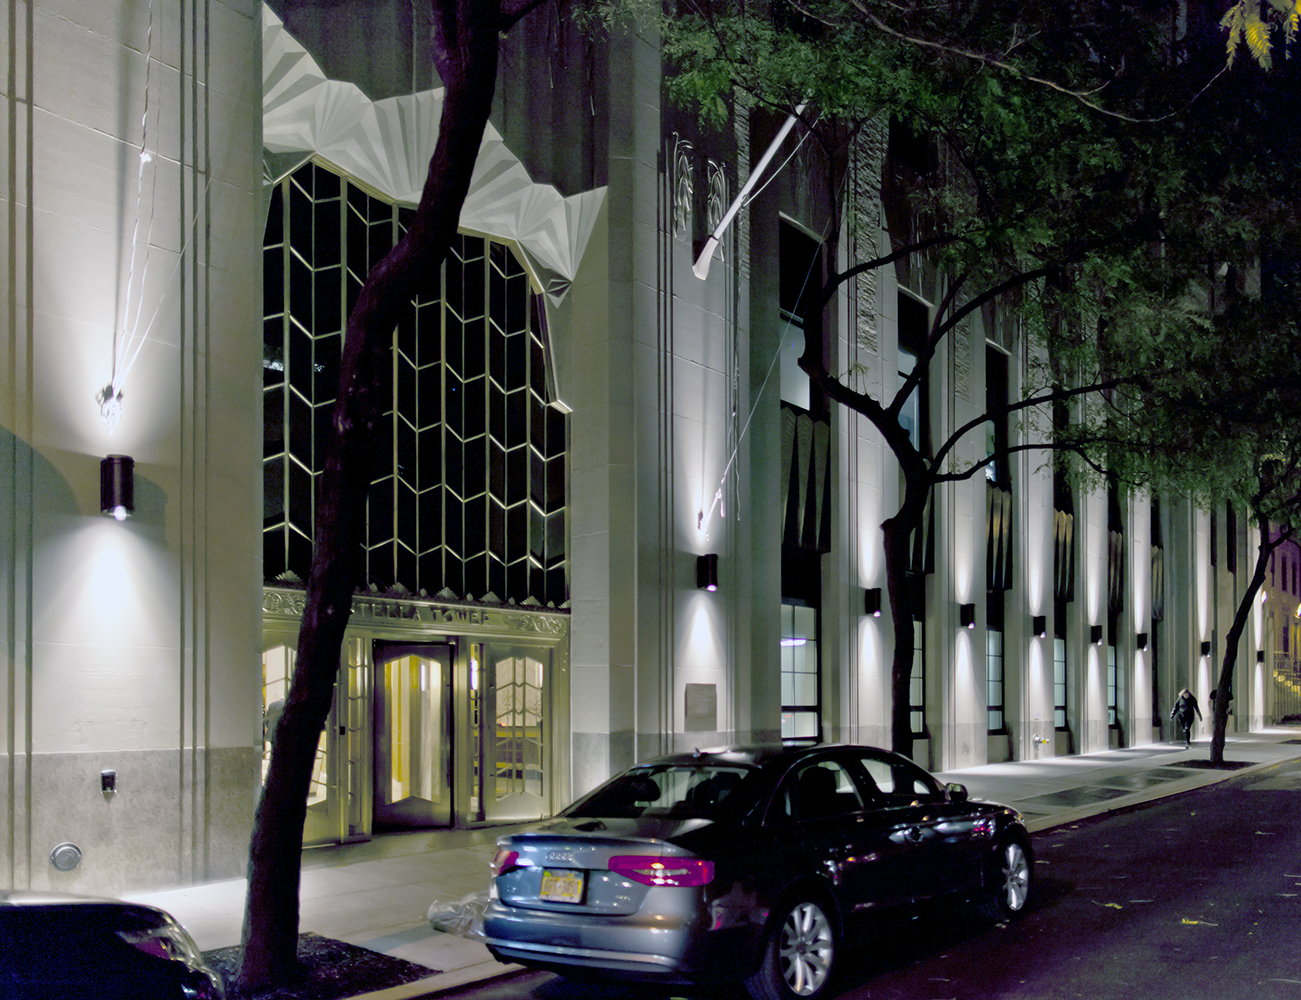 Pla outdoor light fixtures provide uplight and downlight on a commercial building exterior at night.